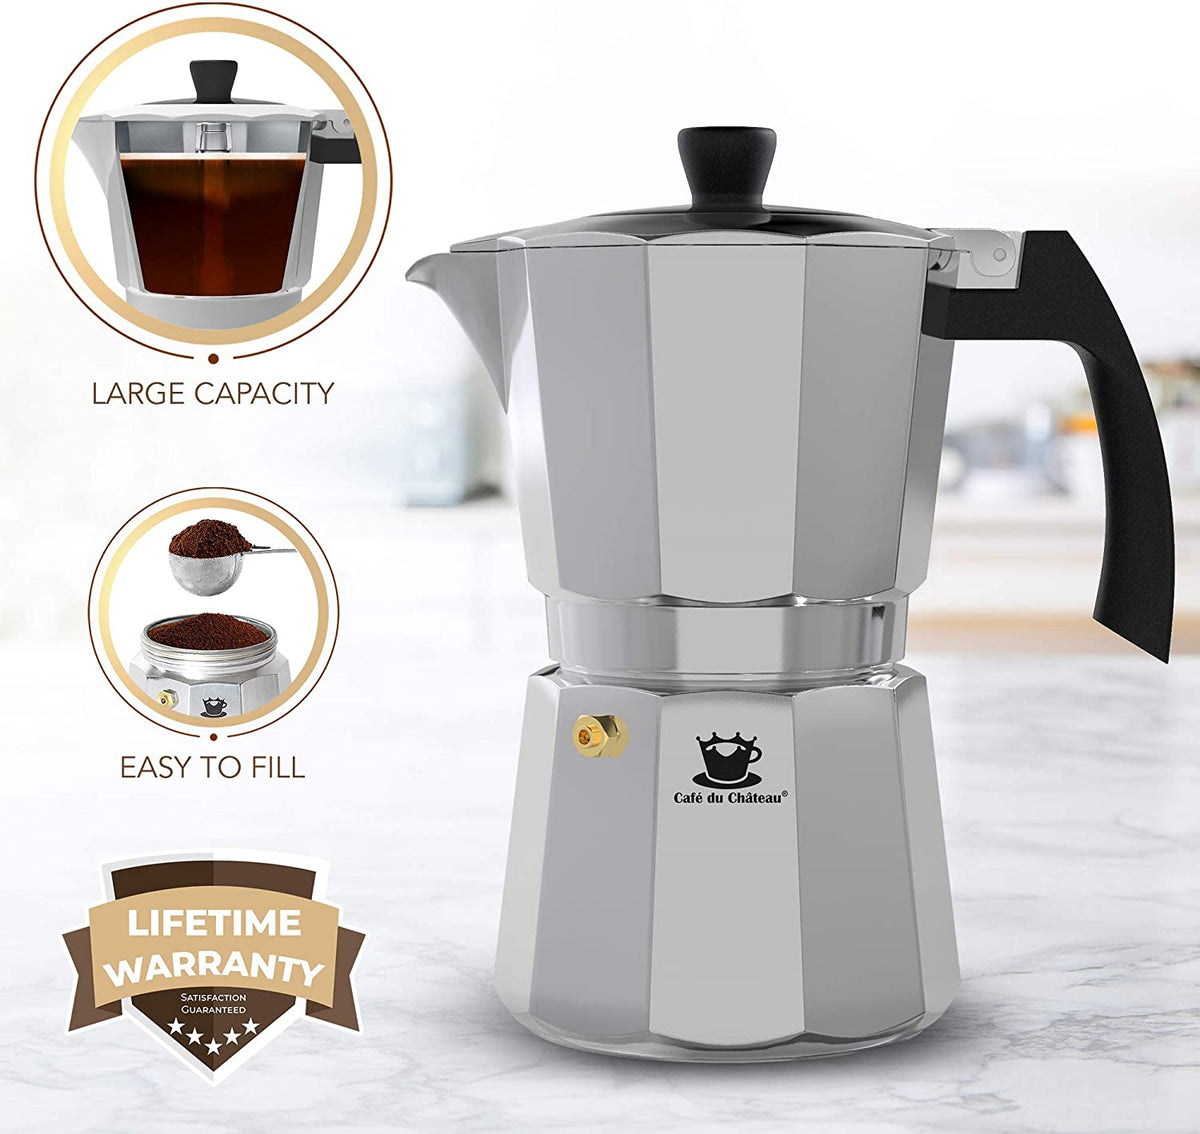 How the Moka works: lift the lid and discover all its secrets